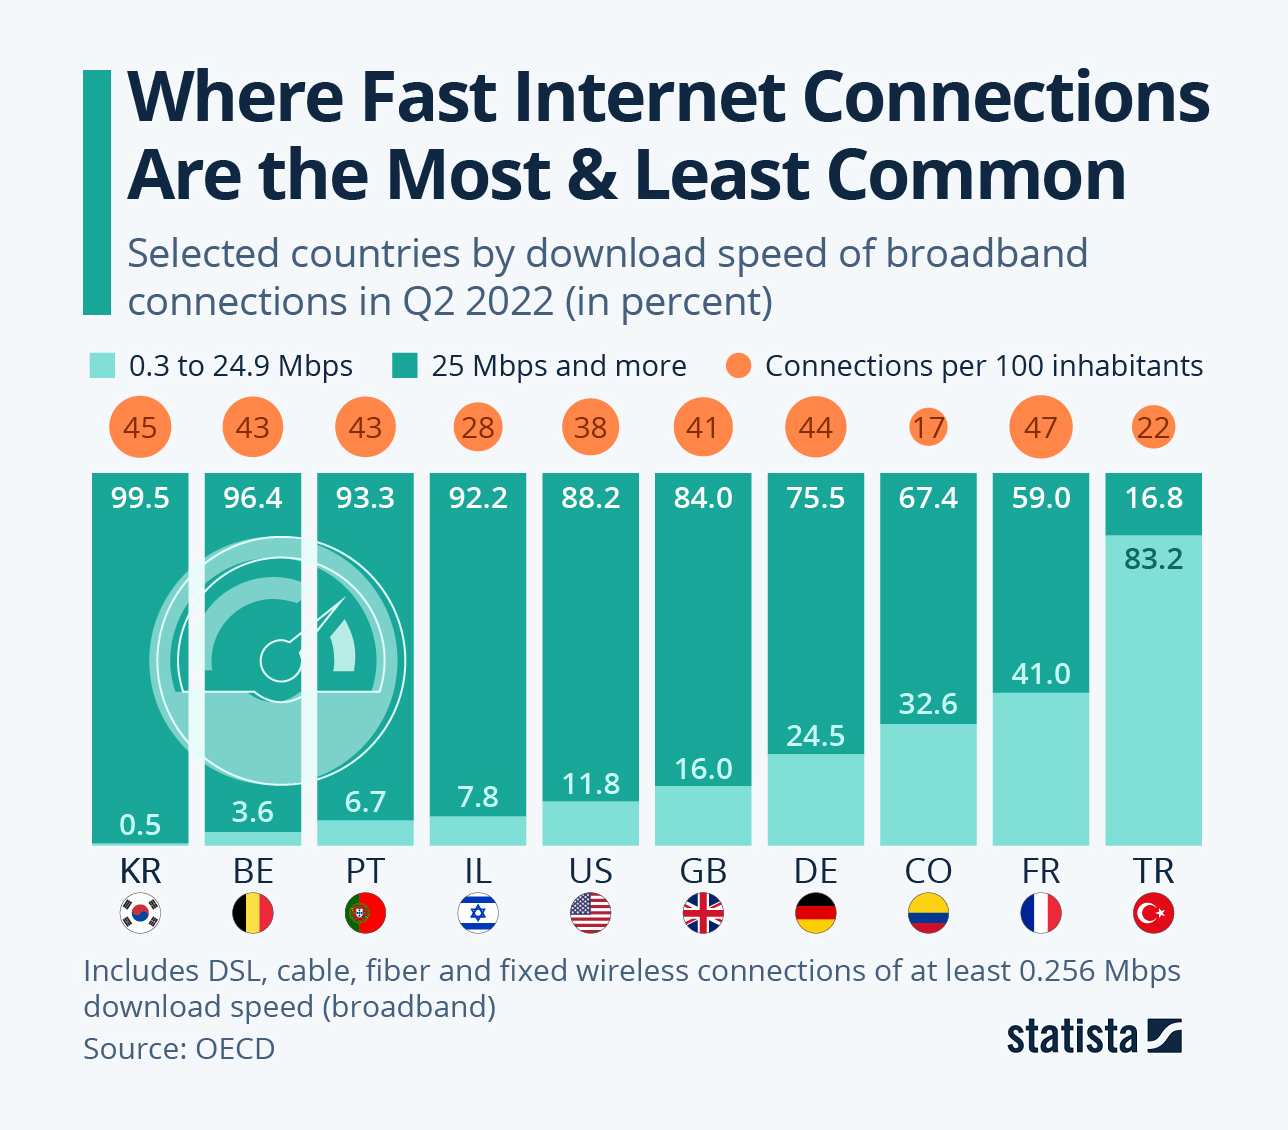 Where Fast Internet Connections Are the Most and Least Common